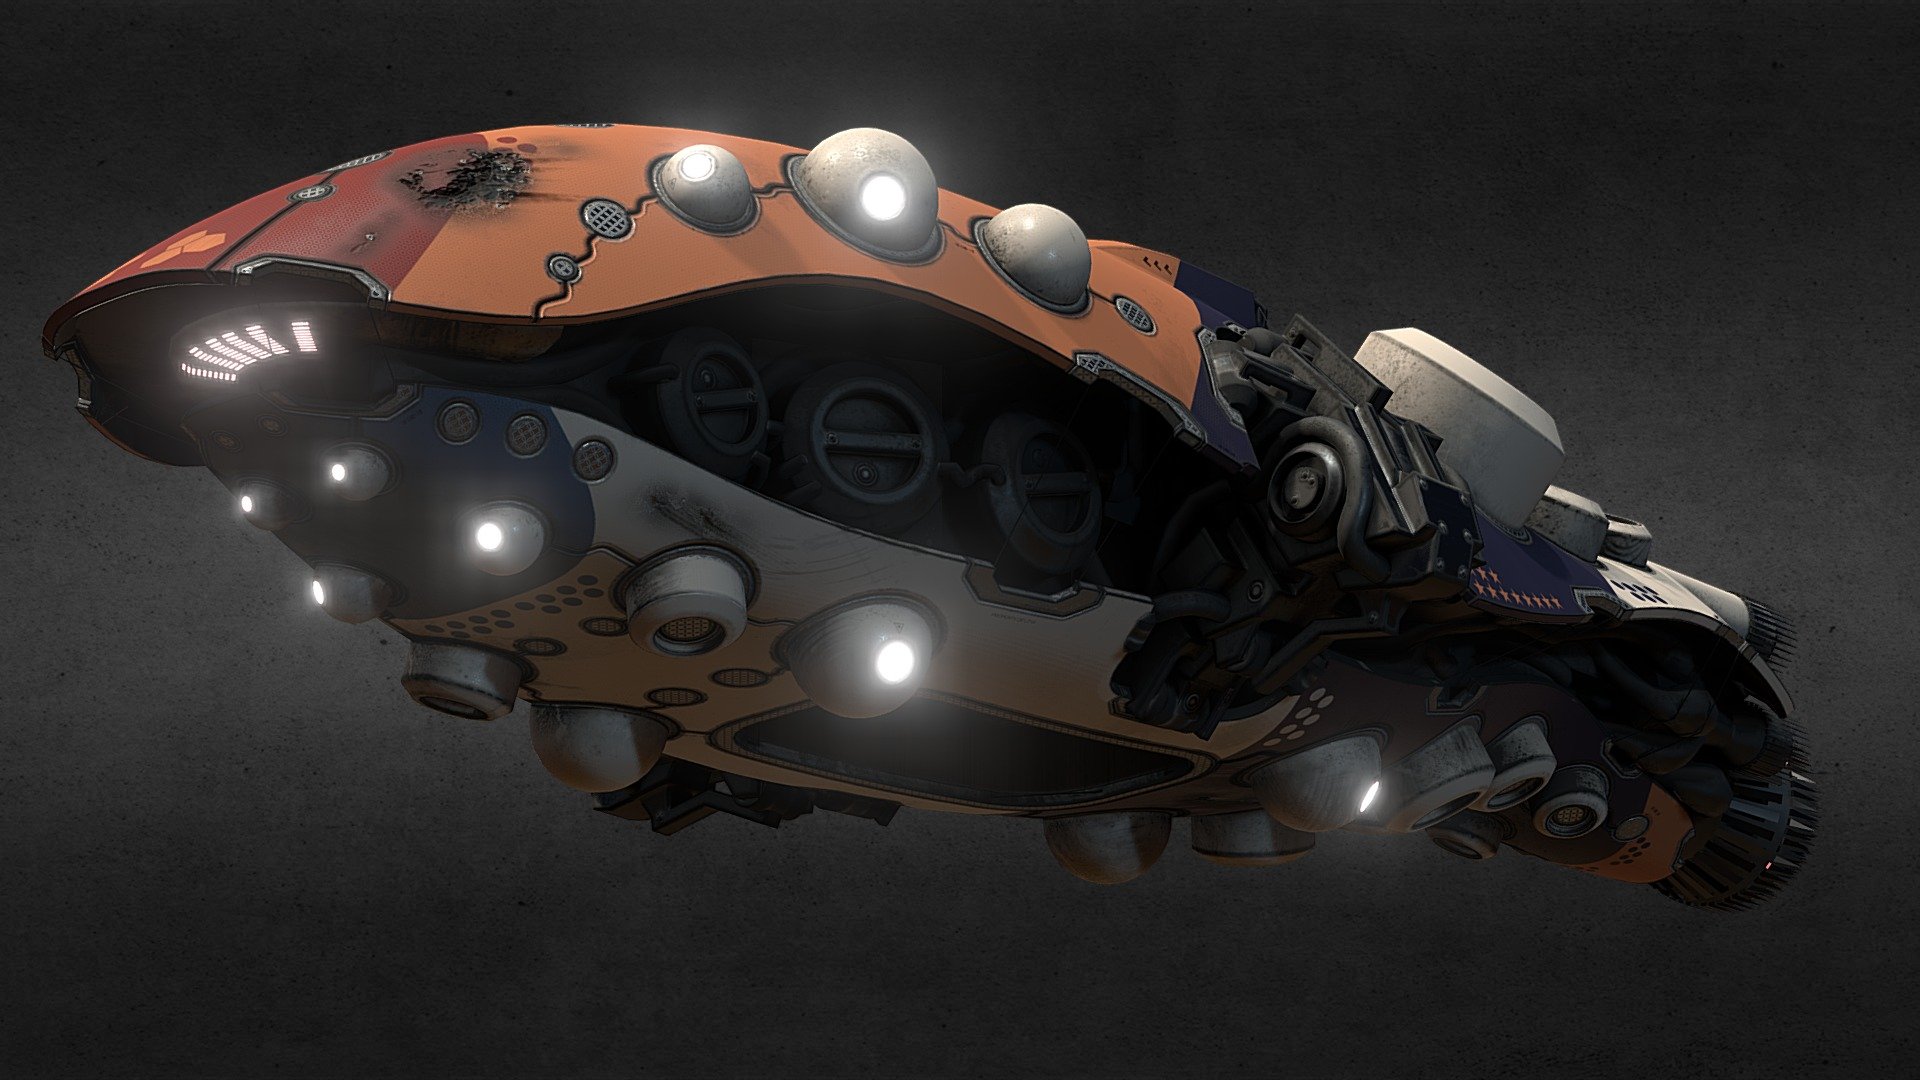 Blender + Substance Painter. Game ready - final model is under 70k triangles and three 4k UDIM’s.

Alternative colored version of https://sketchfab.com/3d-models/sci-fi-ship-whale-class-security-frigate-2c1009114bee4c128b506ad217015d7f - Sci-Fi Ship - WH0501(Alt colors) - 3D model by futaba@blender (@futaba_blender) 3d model